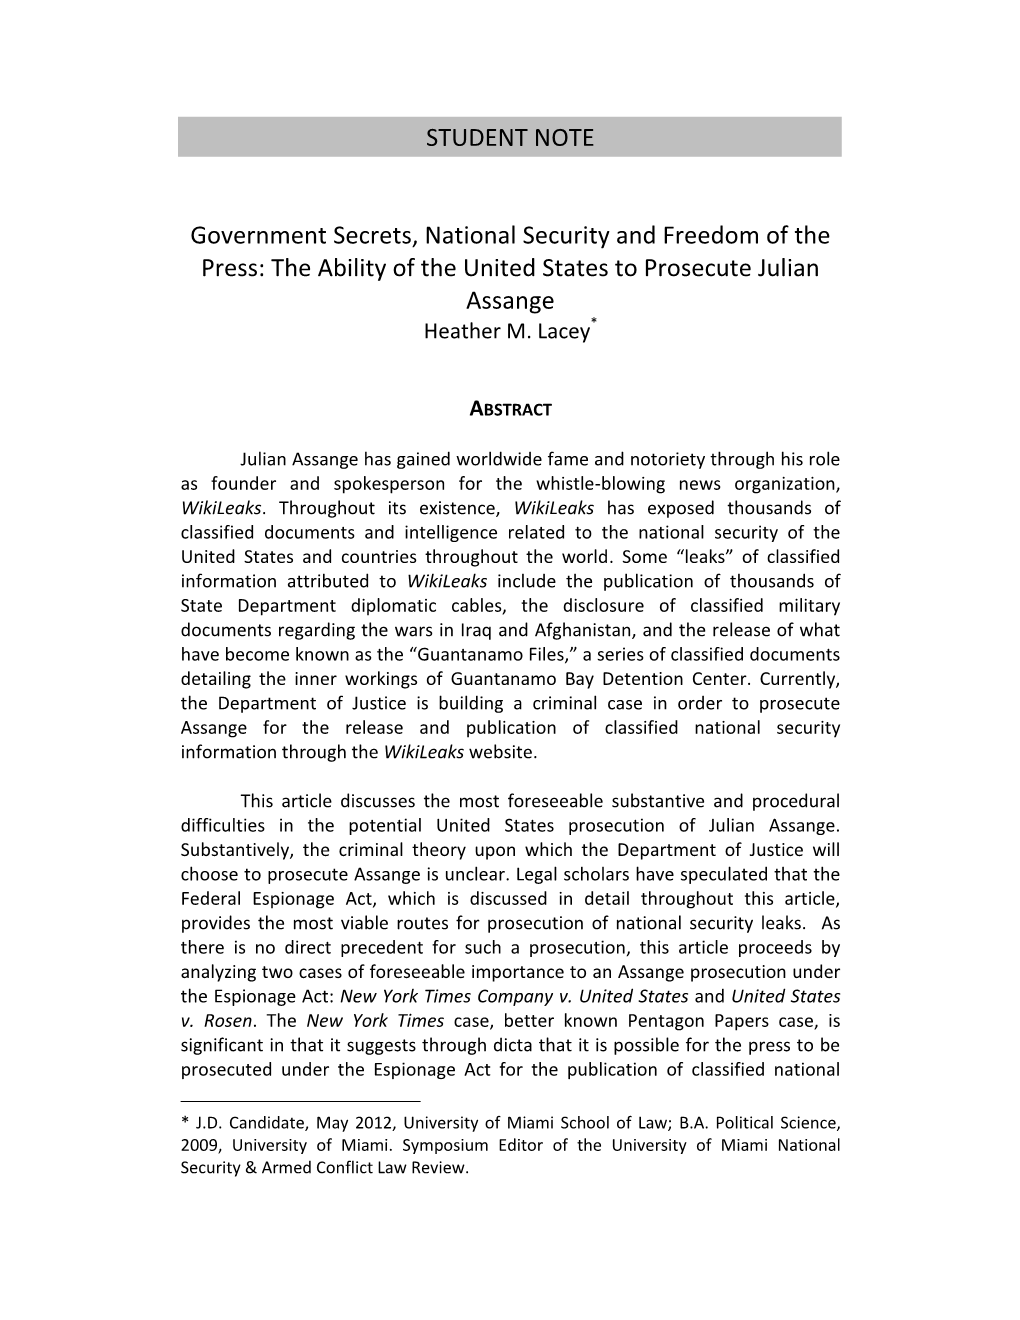 STUDENT NOTE Government Secrets, National Security and Freedom Of